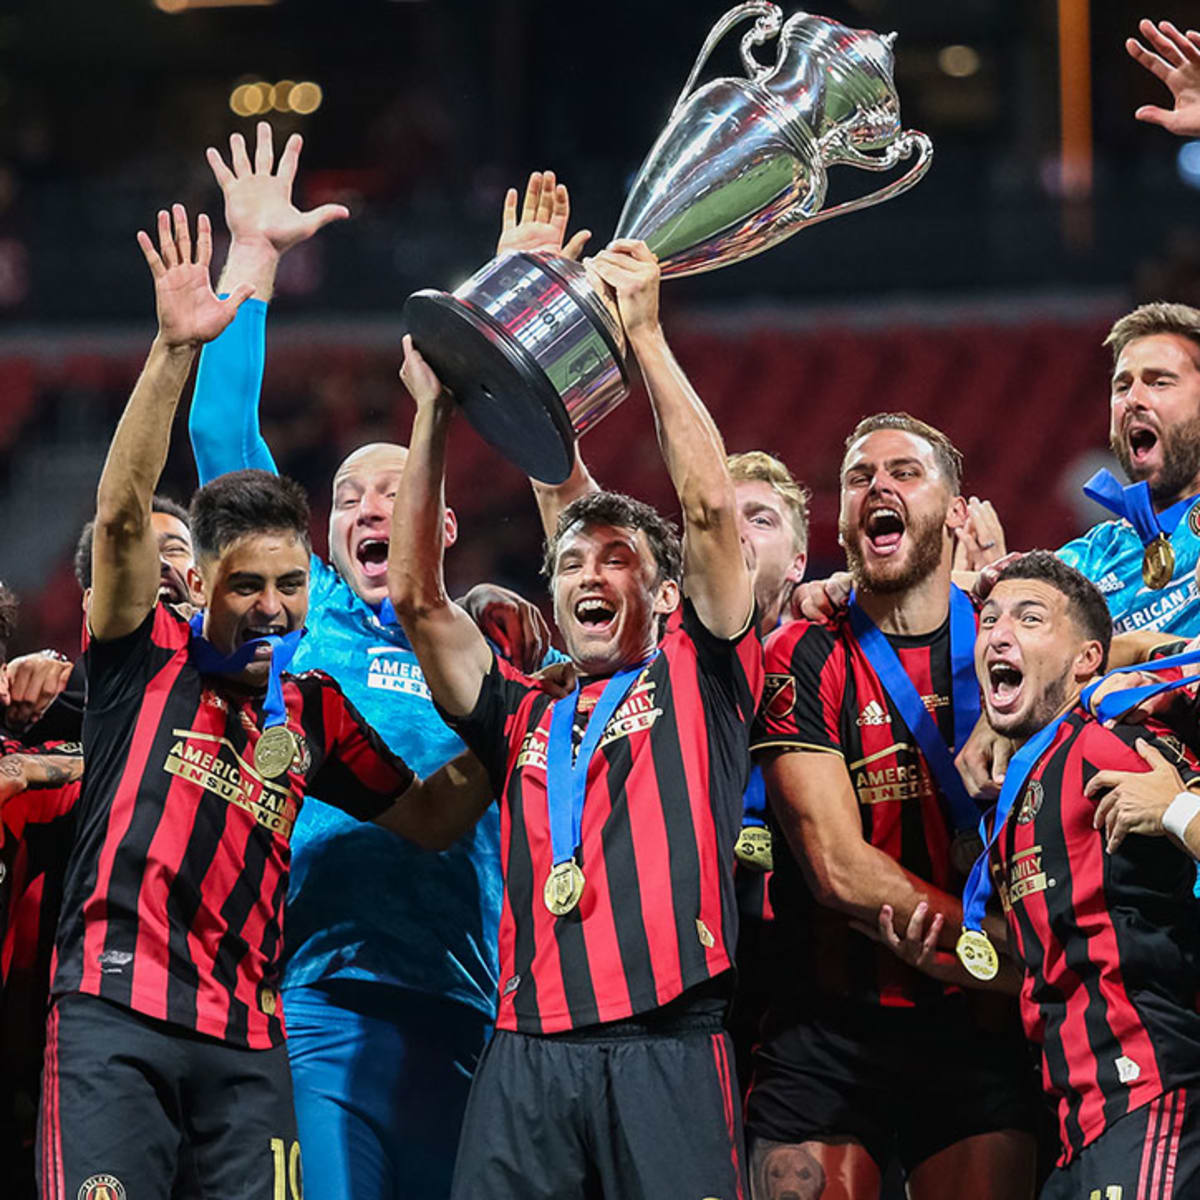 US Open Cup 2019: Atlanta United wins title, adds to trophy count